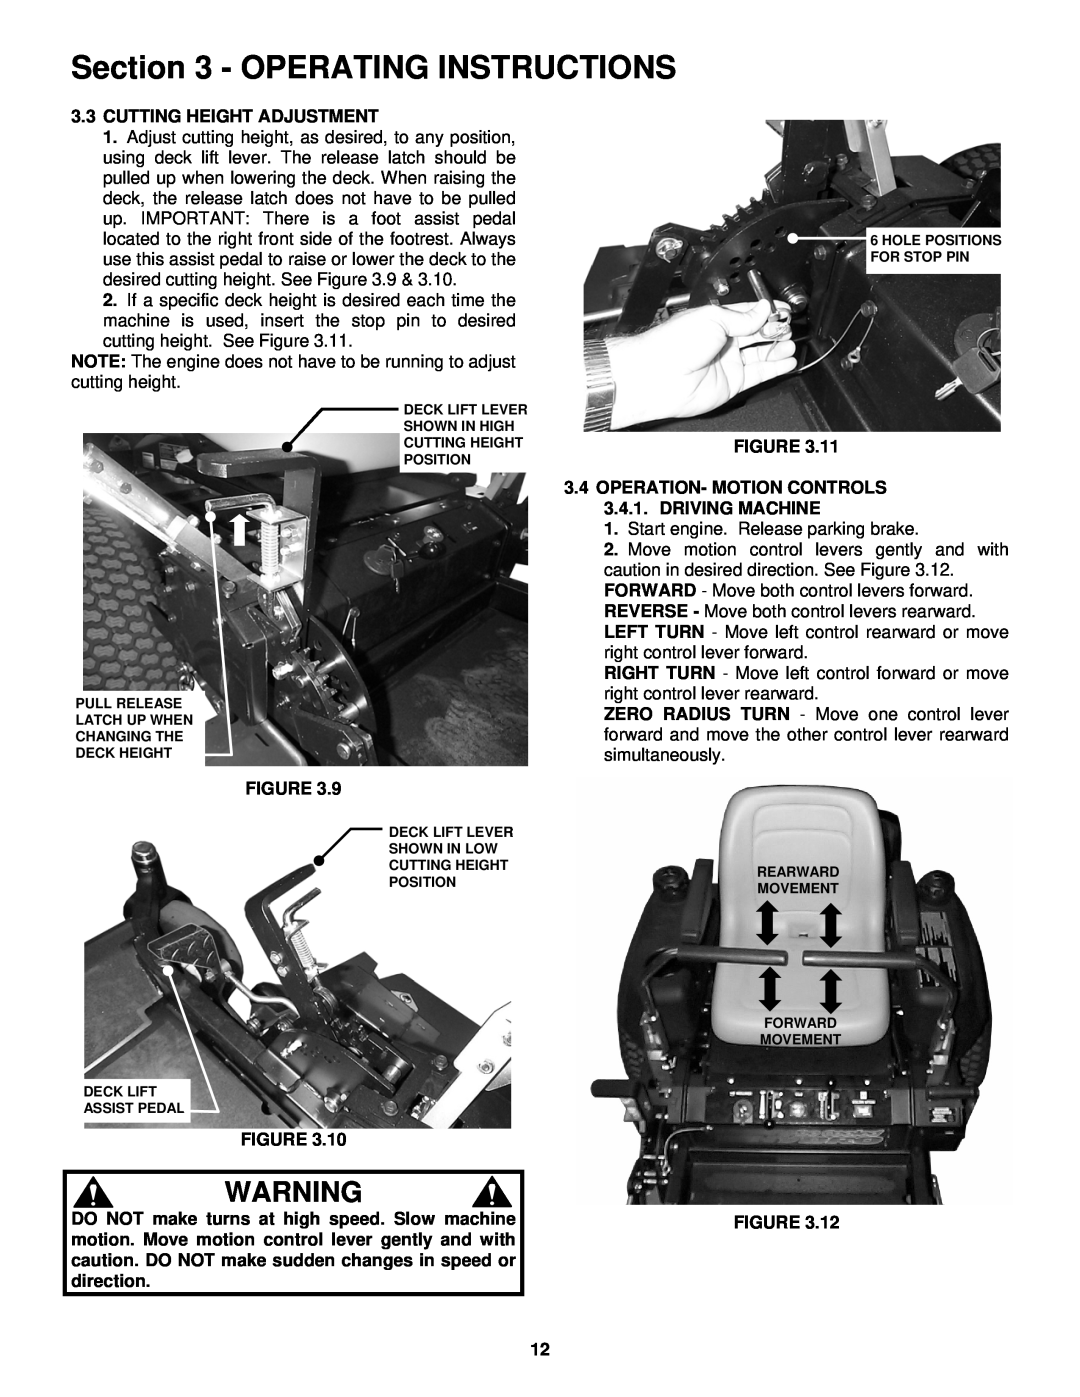 Snapper NZM19481KWV Operating Instructions, Cutting Height Adjustment, OPERATION- MOTION CONTROLS 3.4.1. DRIVING MACHINE 